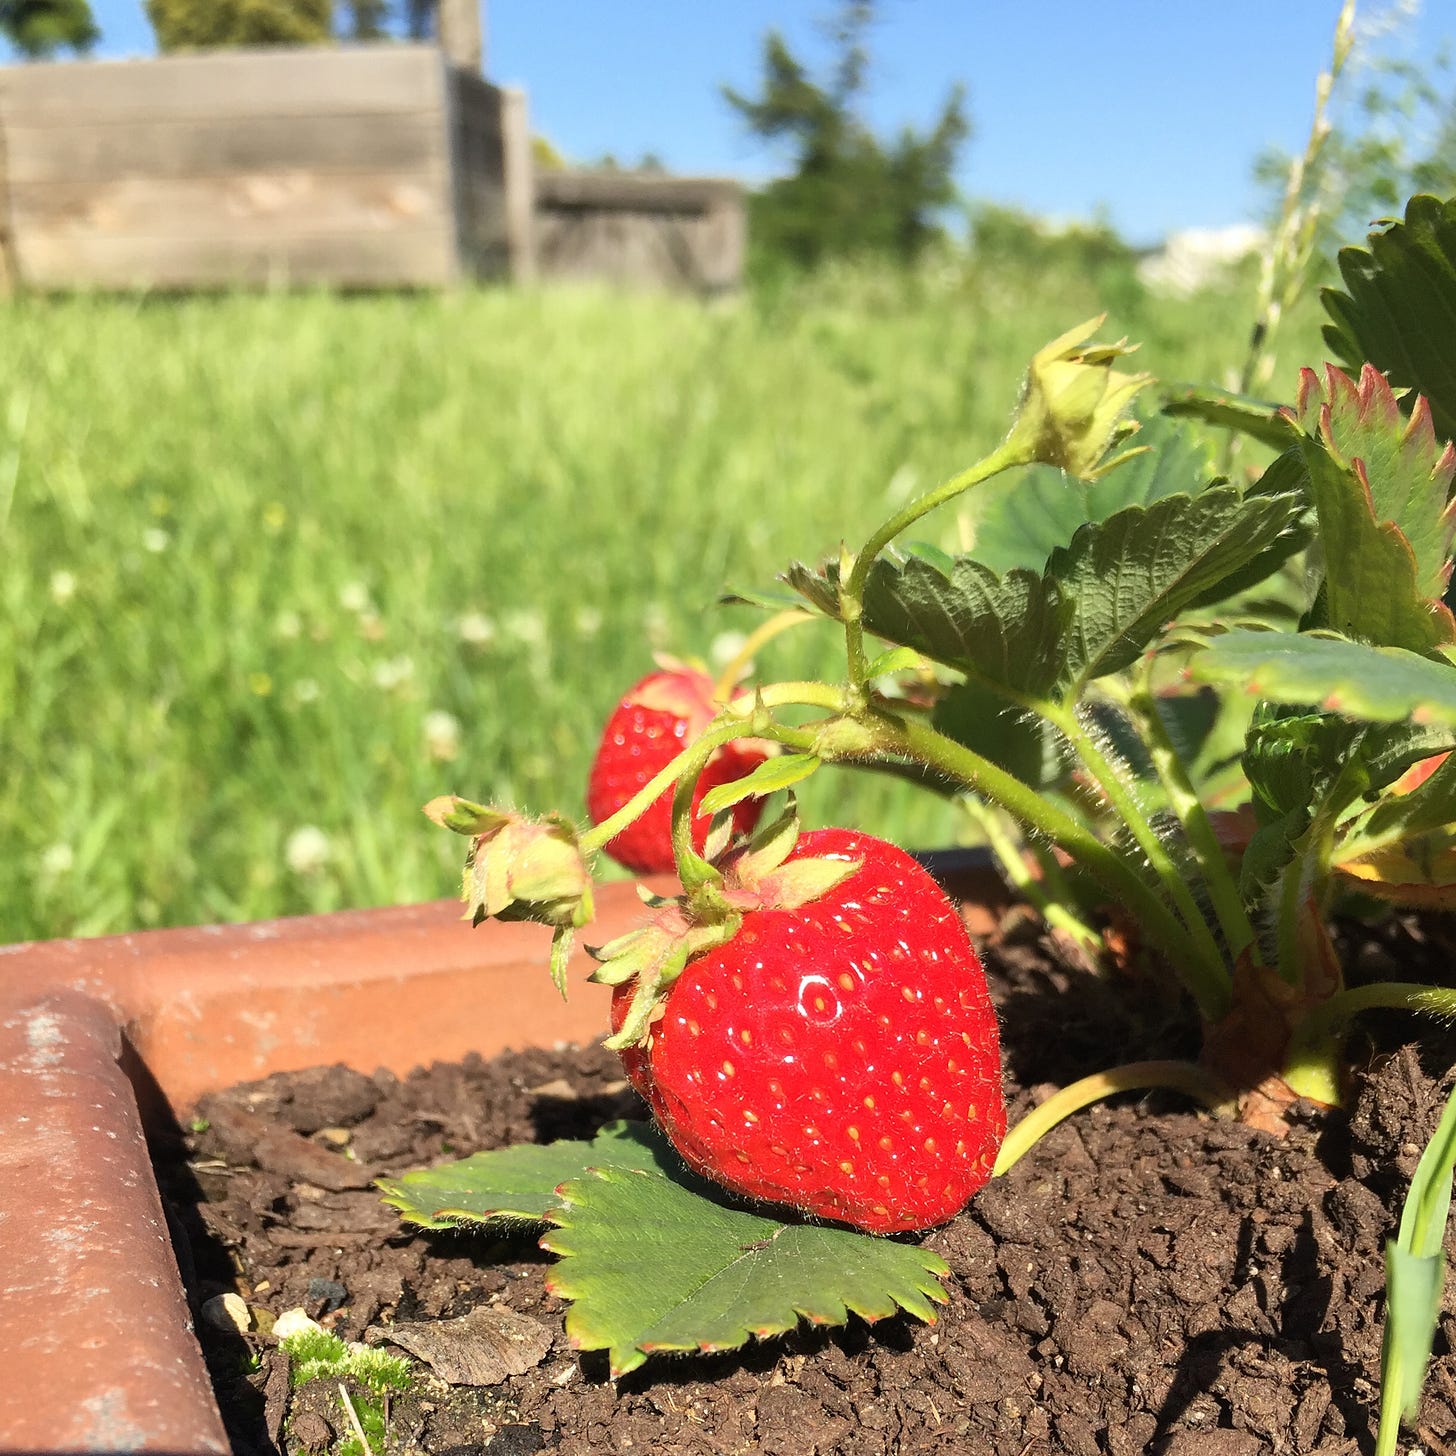 A closeup of two ripe strawberries in a terra cotta pot. in the background, a green lawn and blue sky.